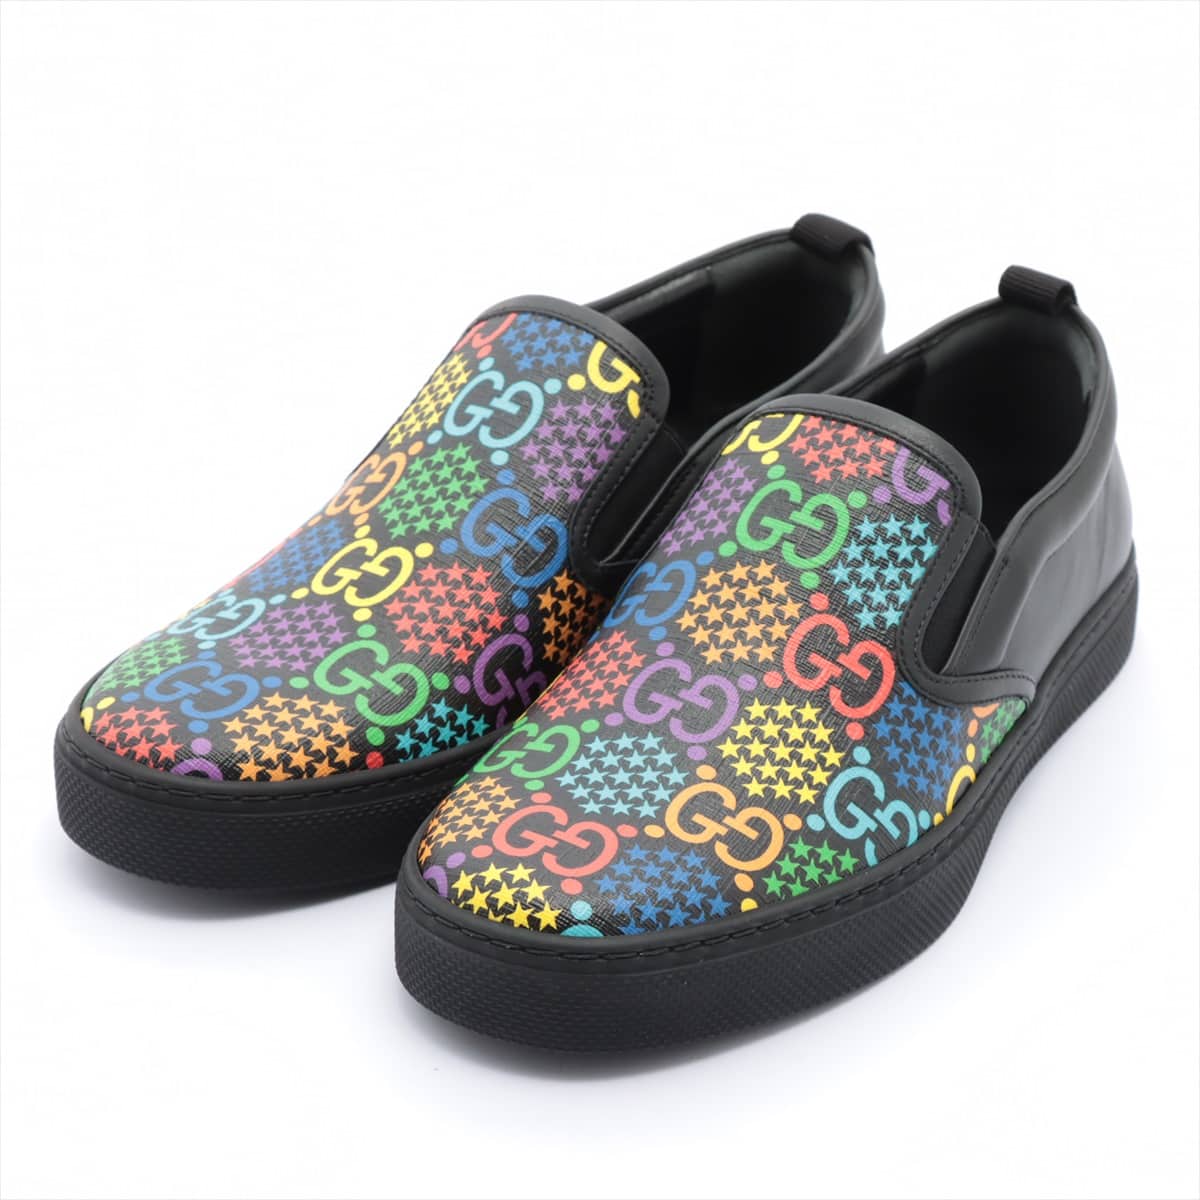 Gucci GG cychedelic Leather Slip-on 7 Ladies' Multicolor 610080